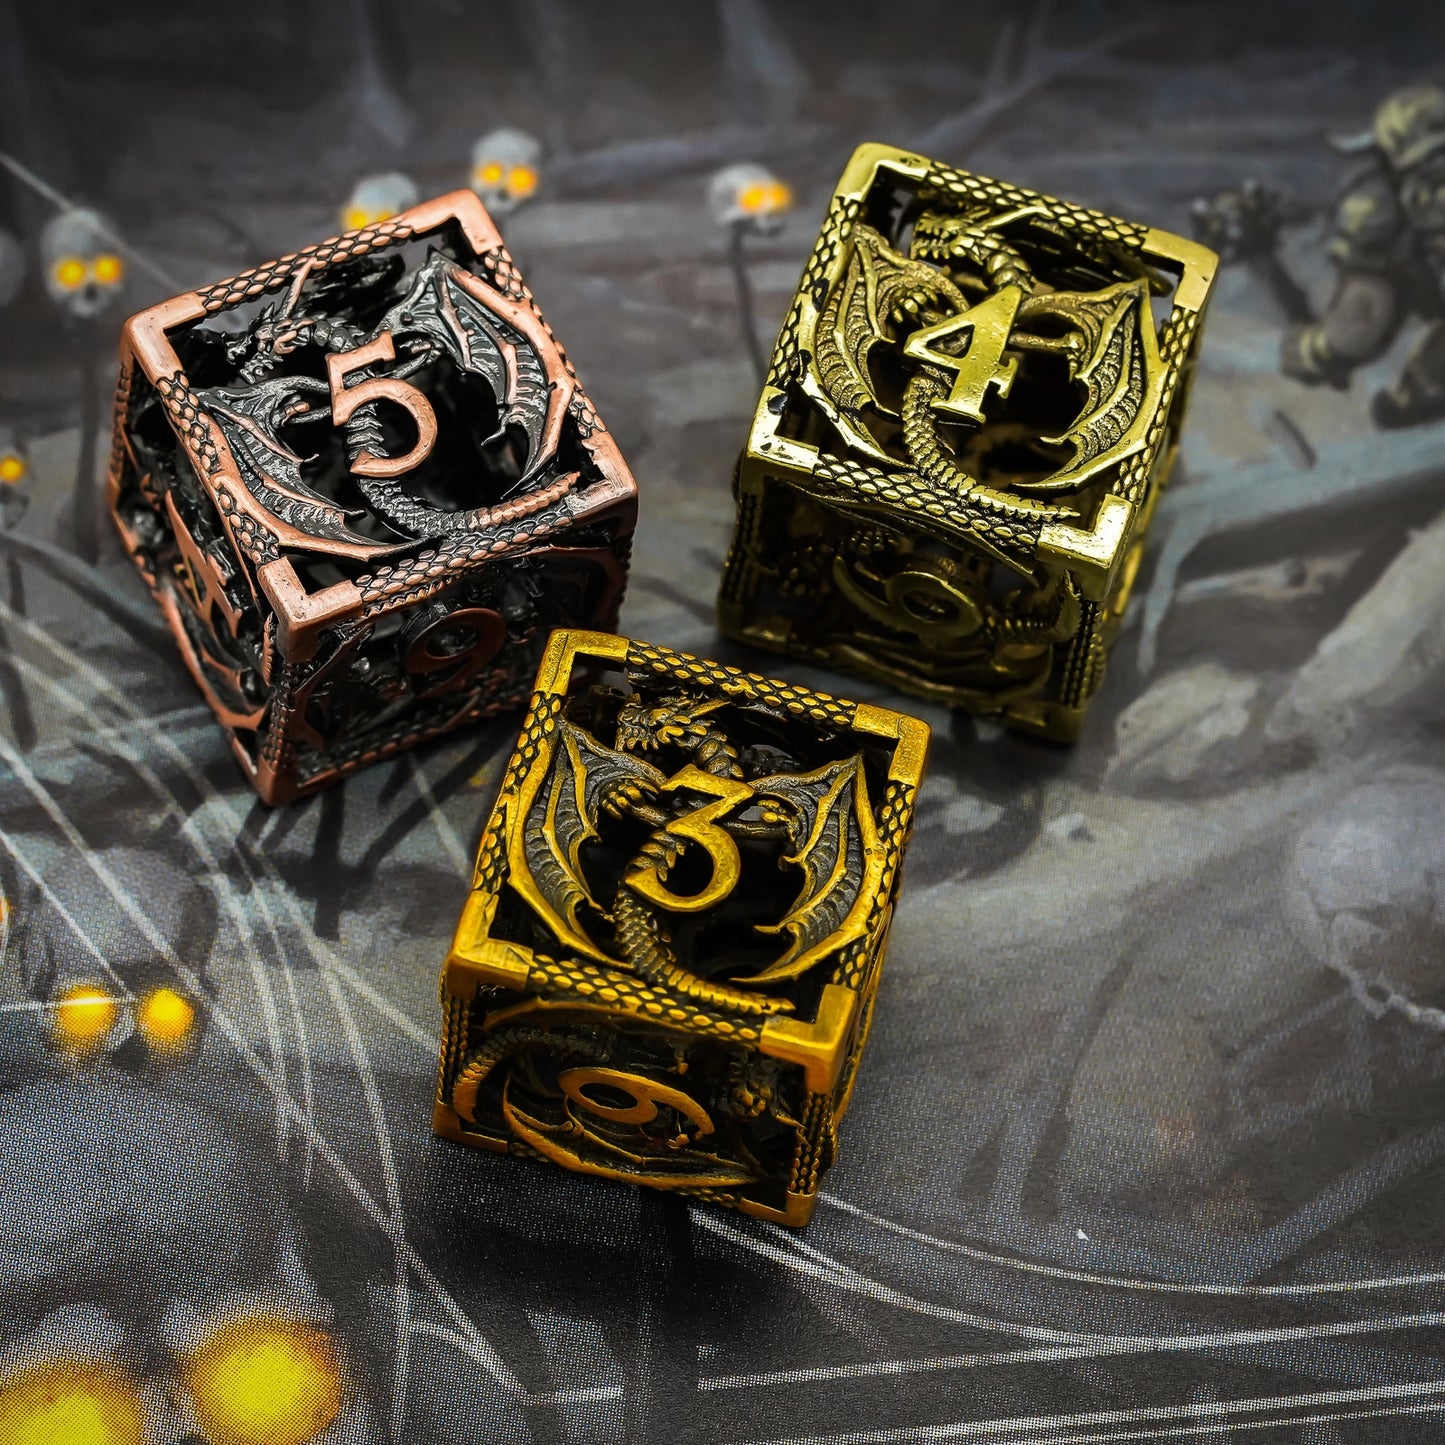 Three different colors of the hollow metal dragon dice sets on dark forest background